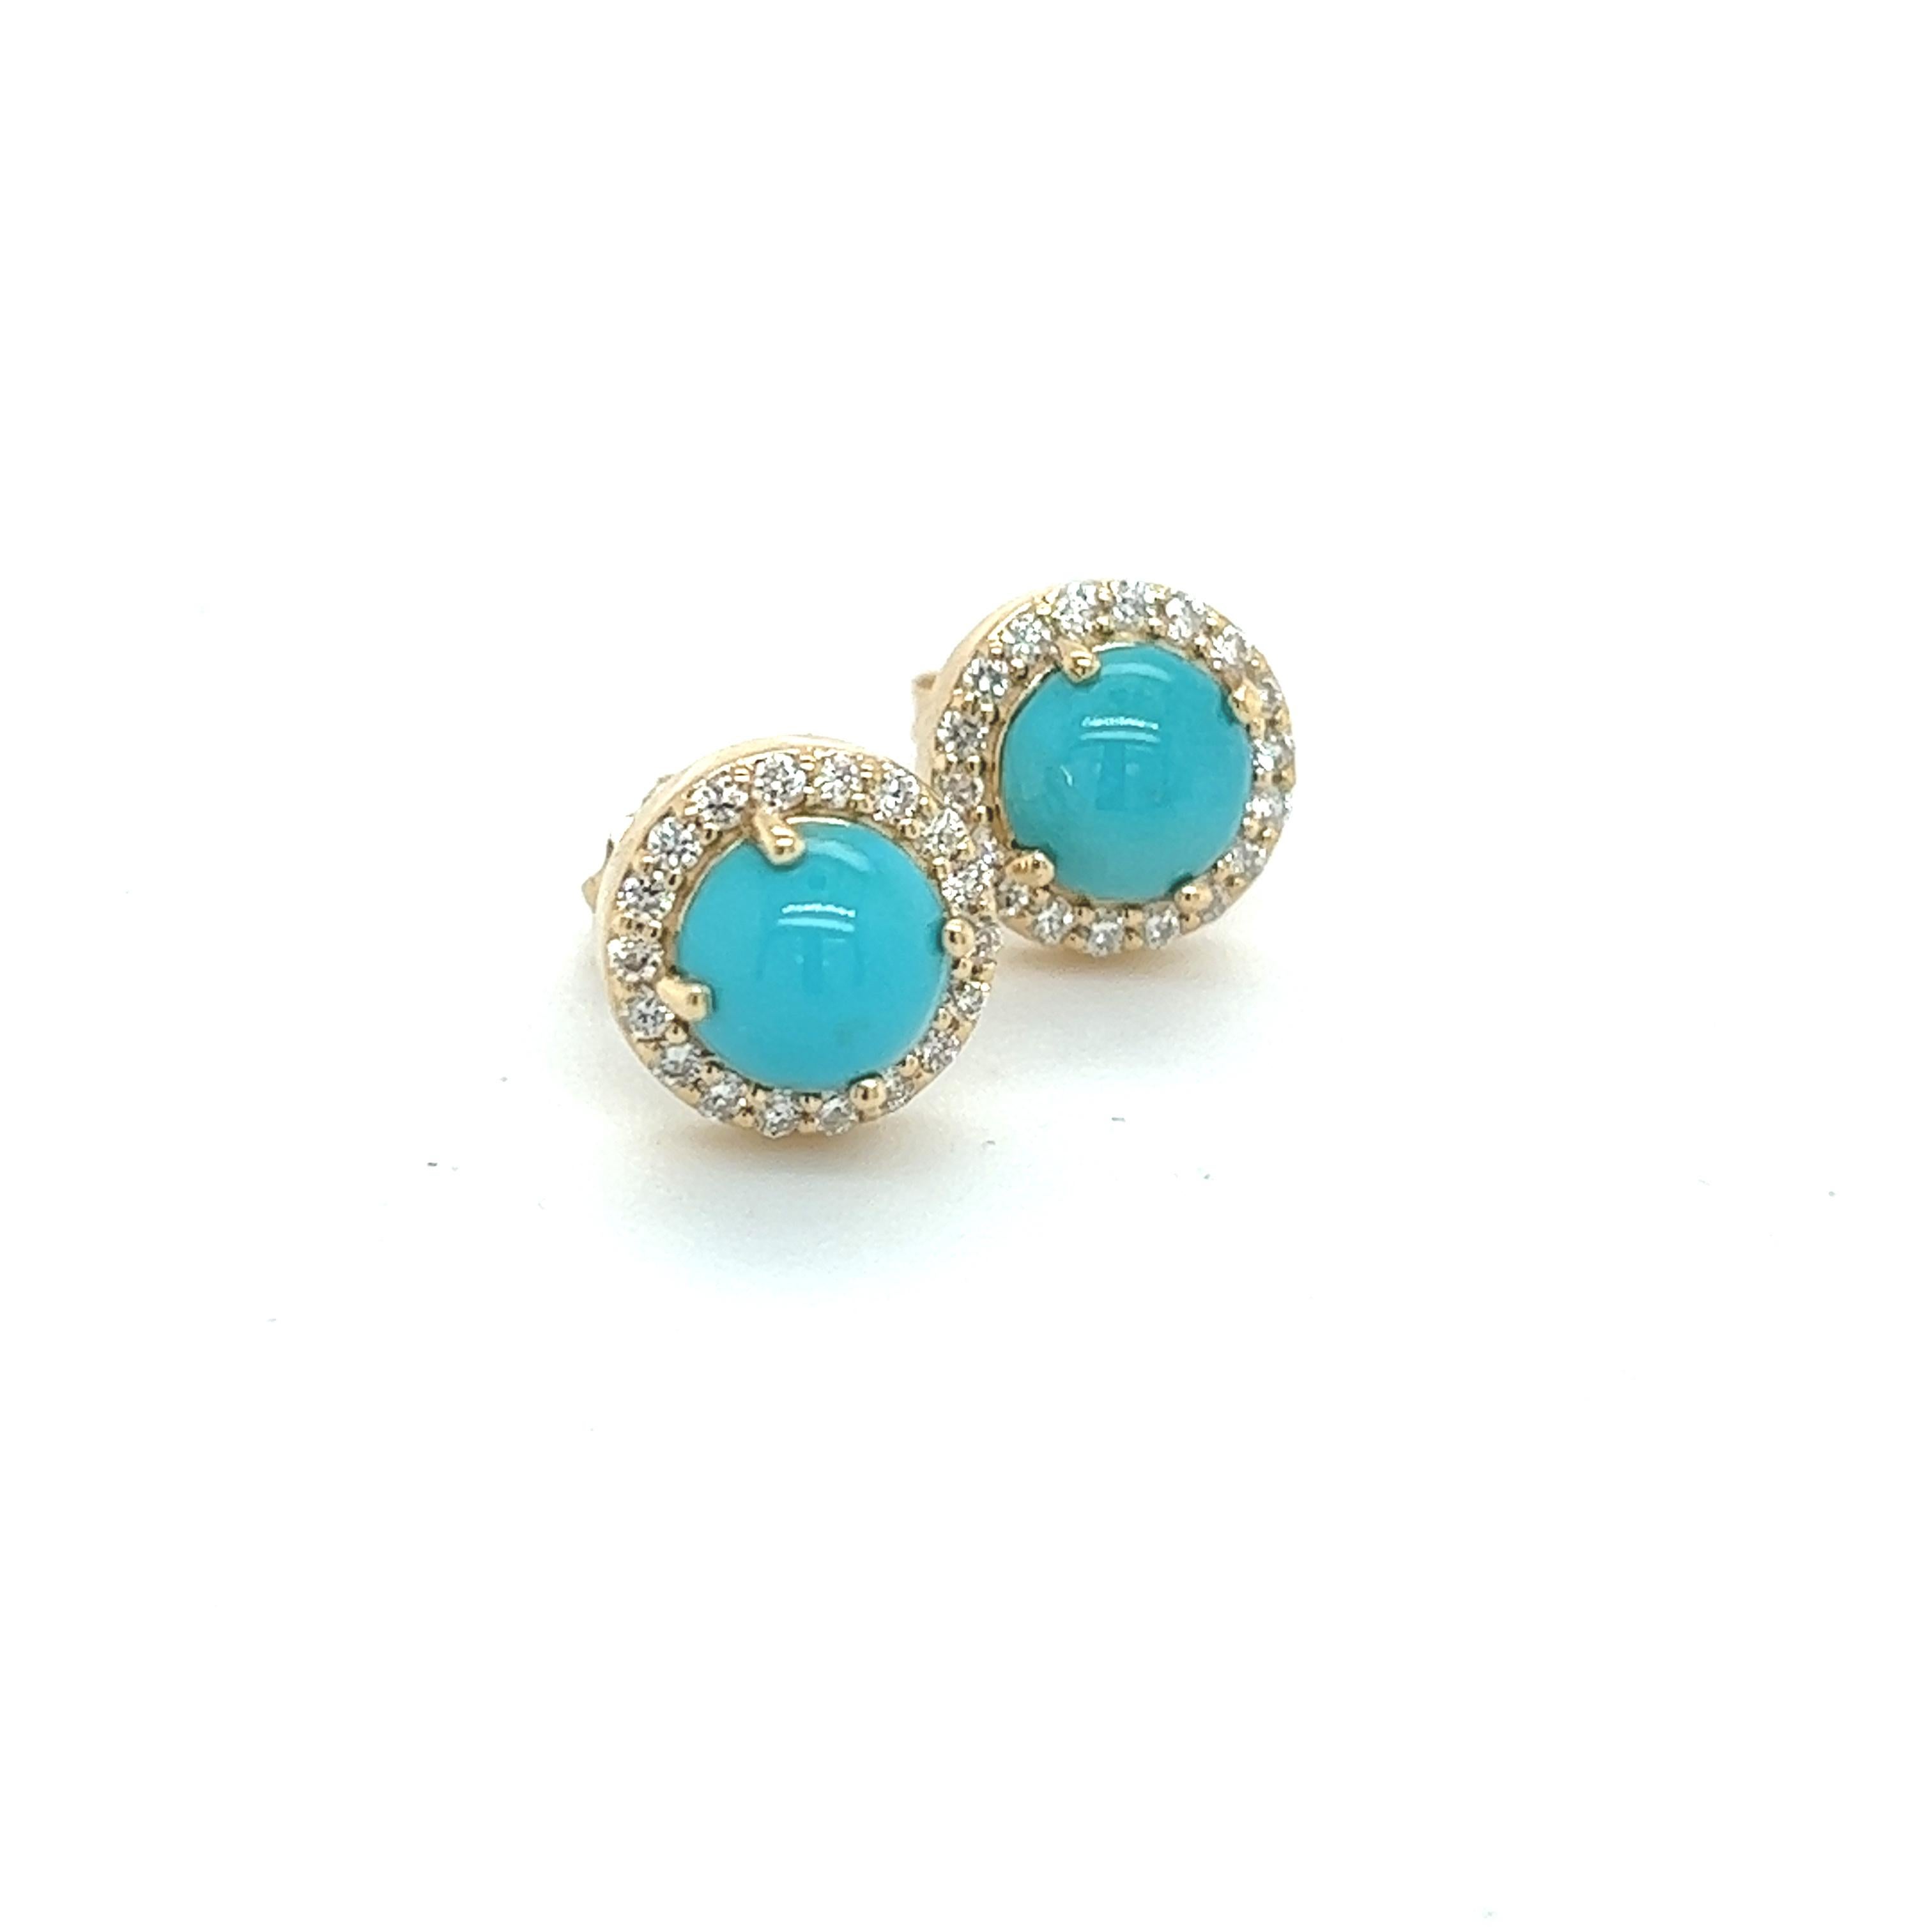 Women's Natural Turquoise Diamond Stud Earrings 14k Yellow Gold 2.18 TCW Certified For Sale